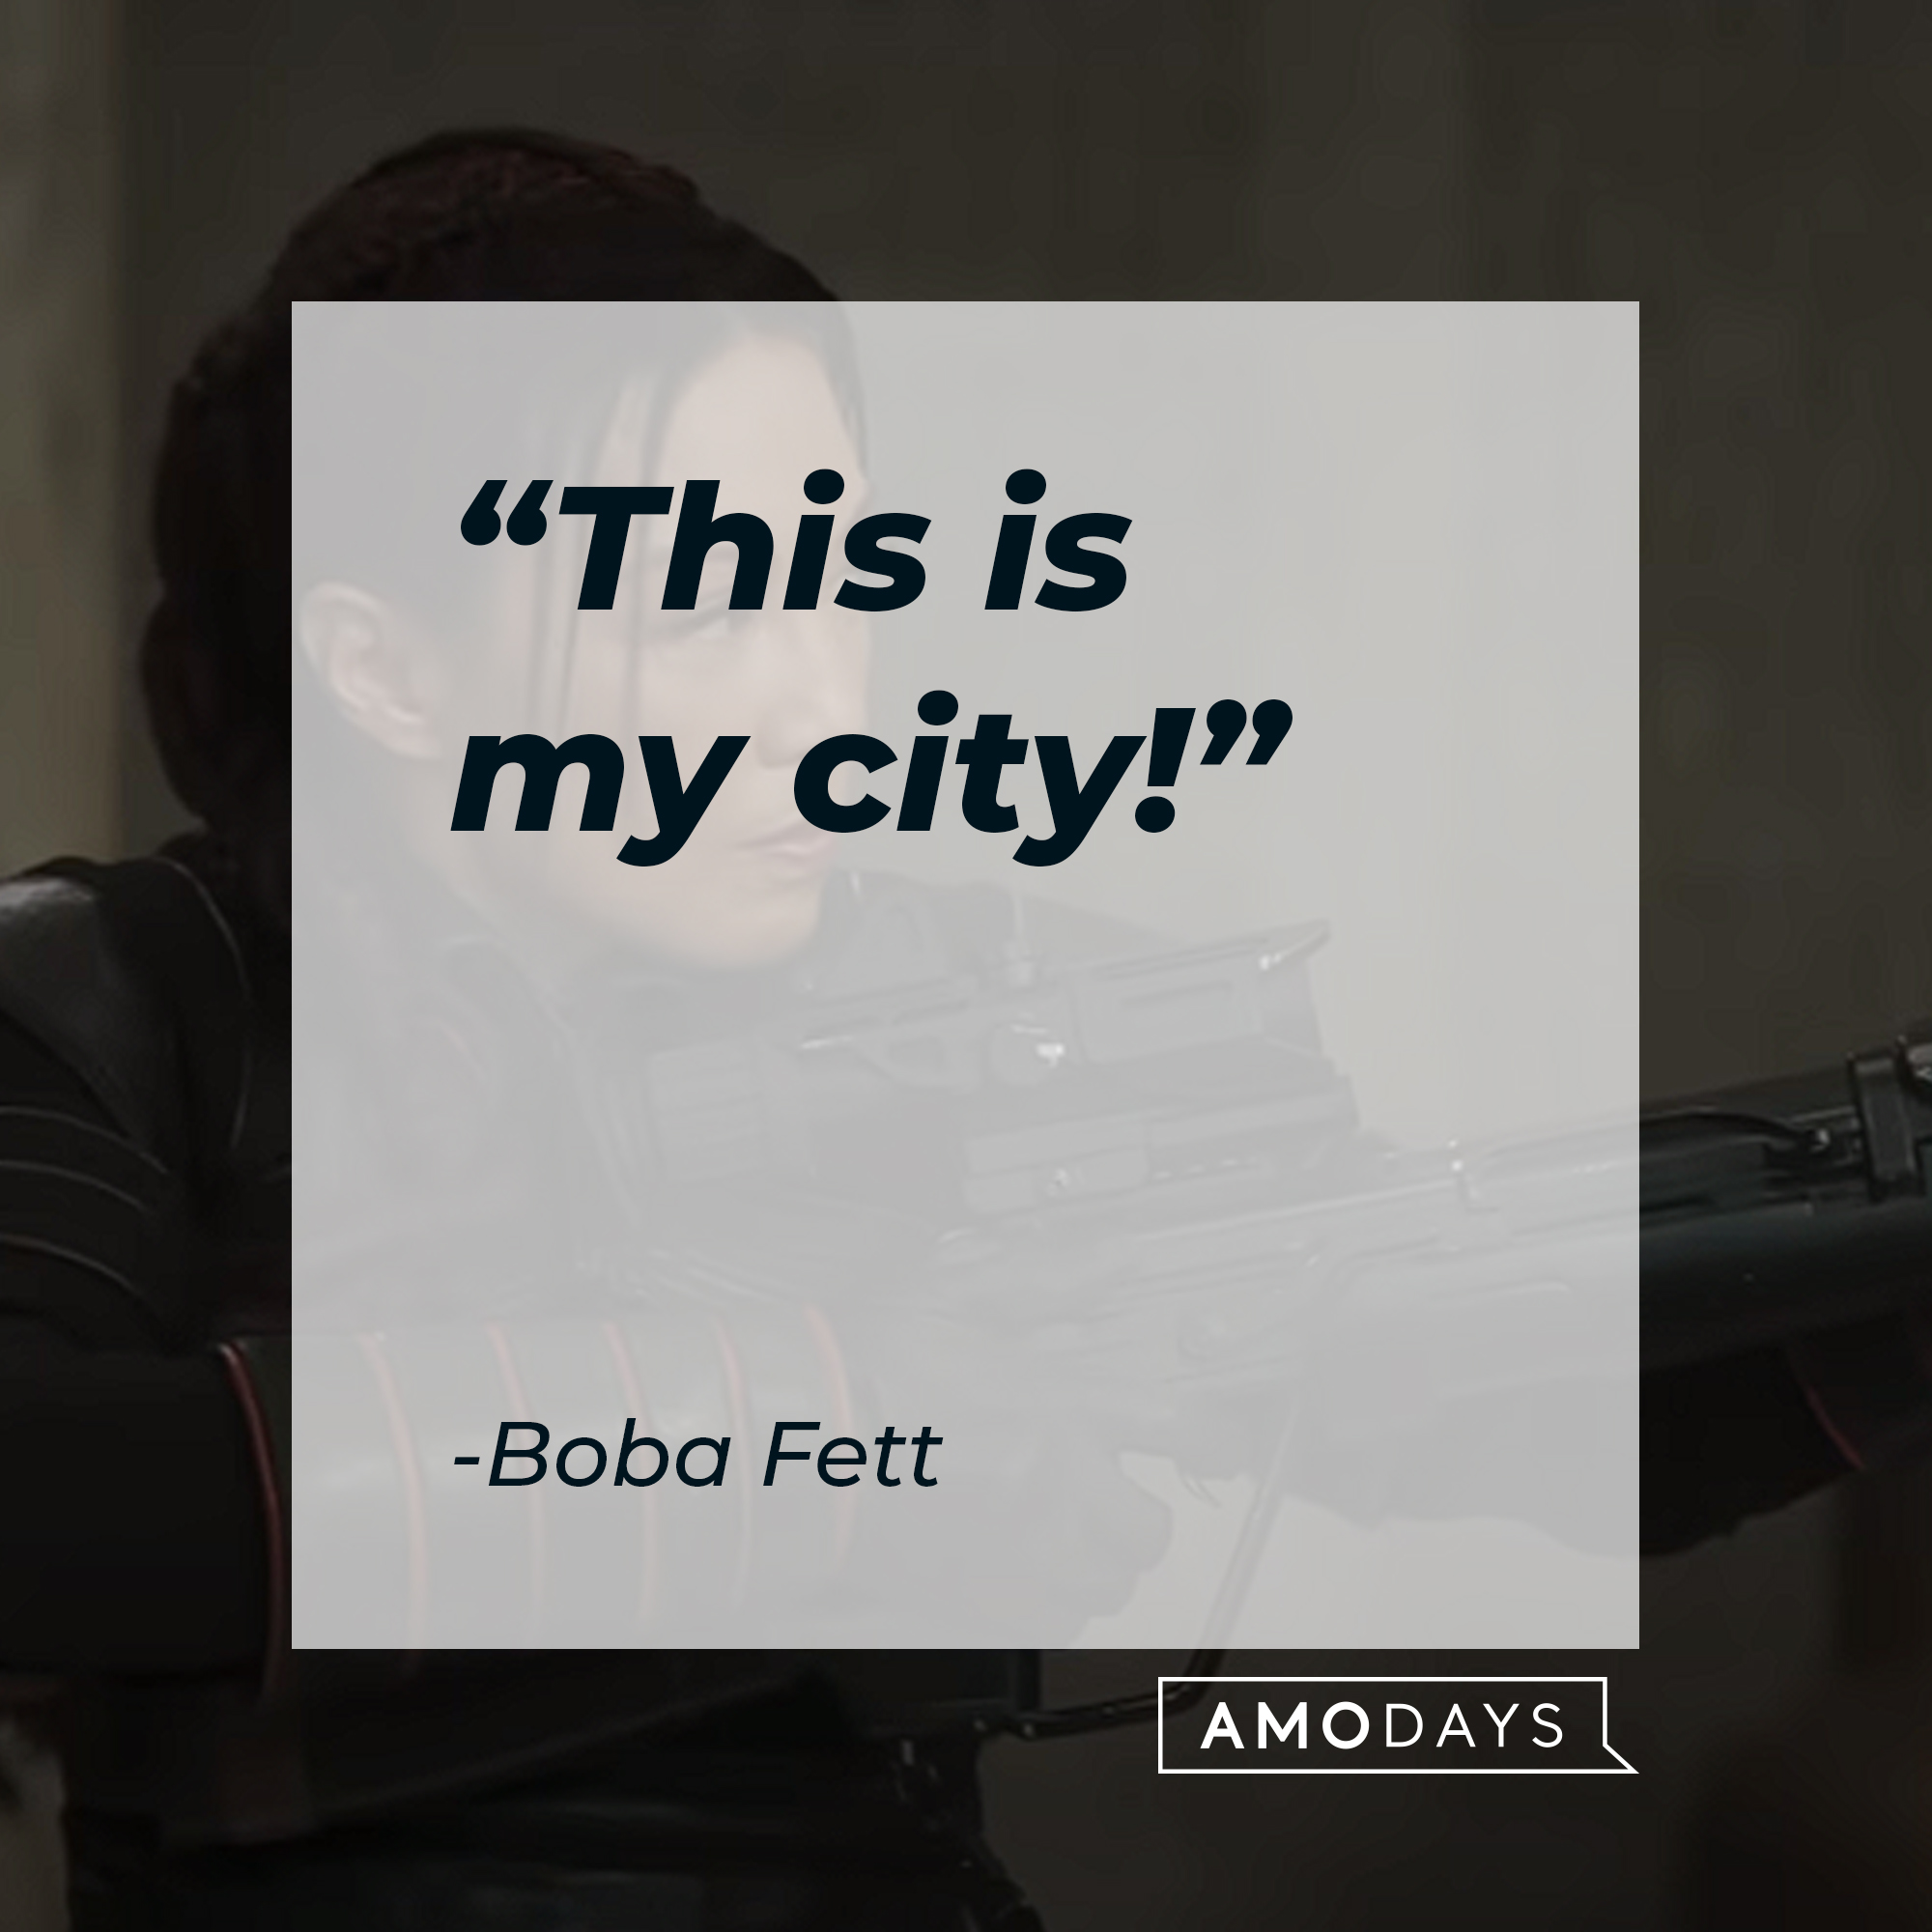 Boba Fett's quote: This is my city!" | Source: youtube.com/StarWars